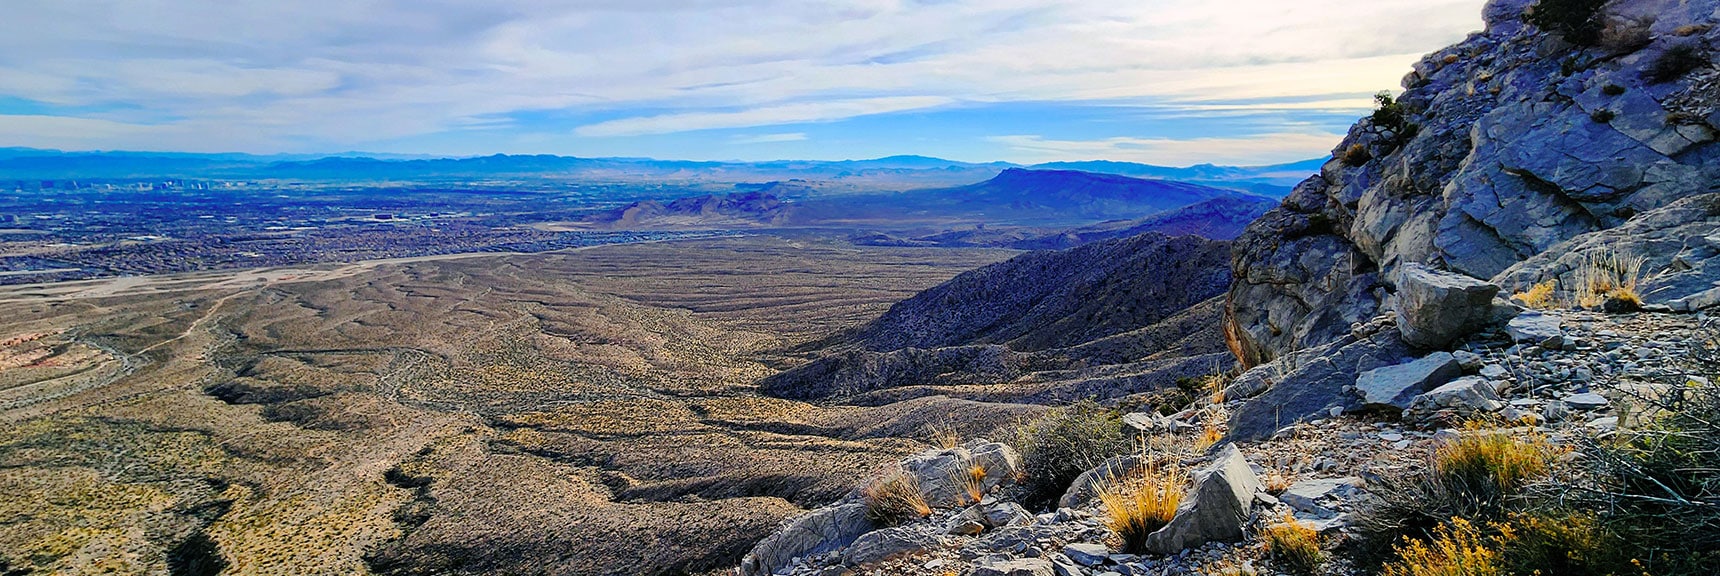 View South to Edge of Blue Diamond Hill and Beyond | Damsel Peak Southeastern Slope | Calico & Brownstone Basins, Nevada